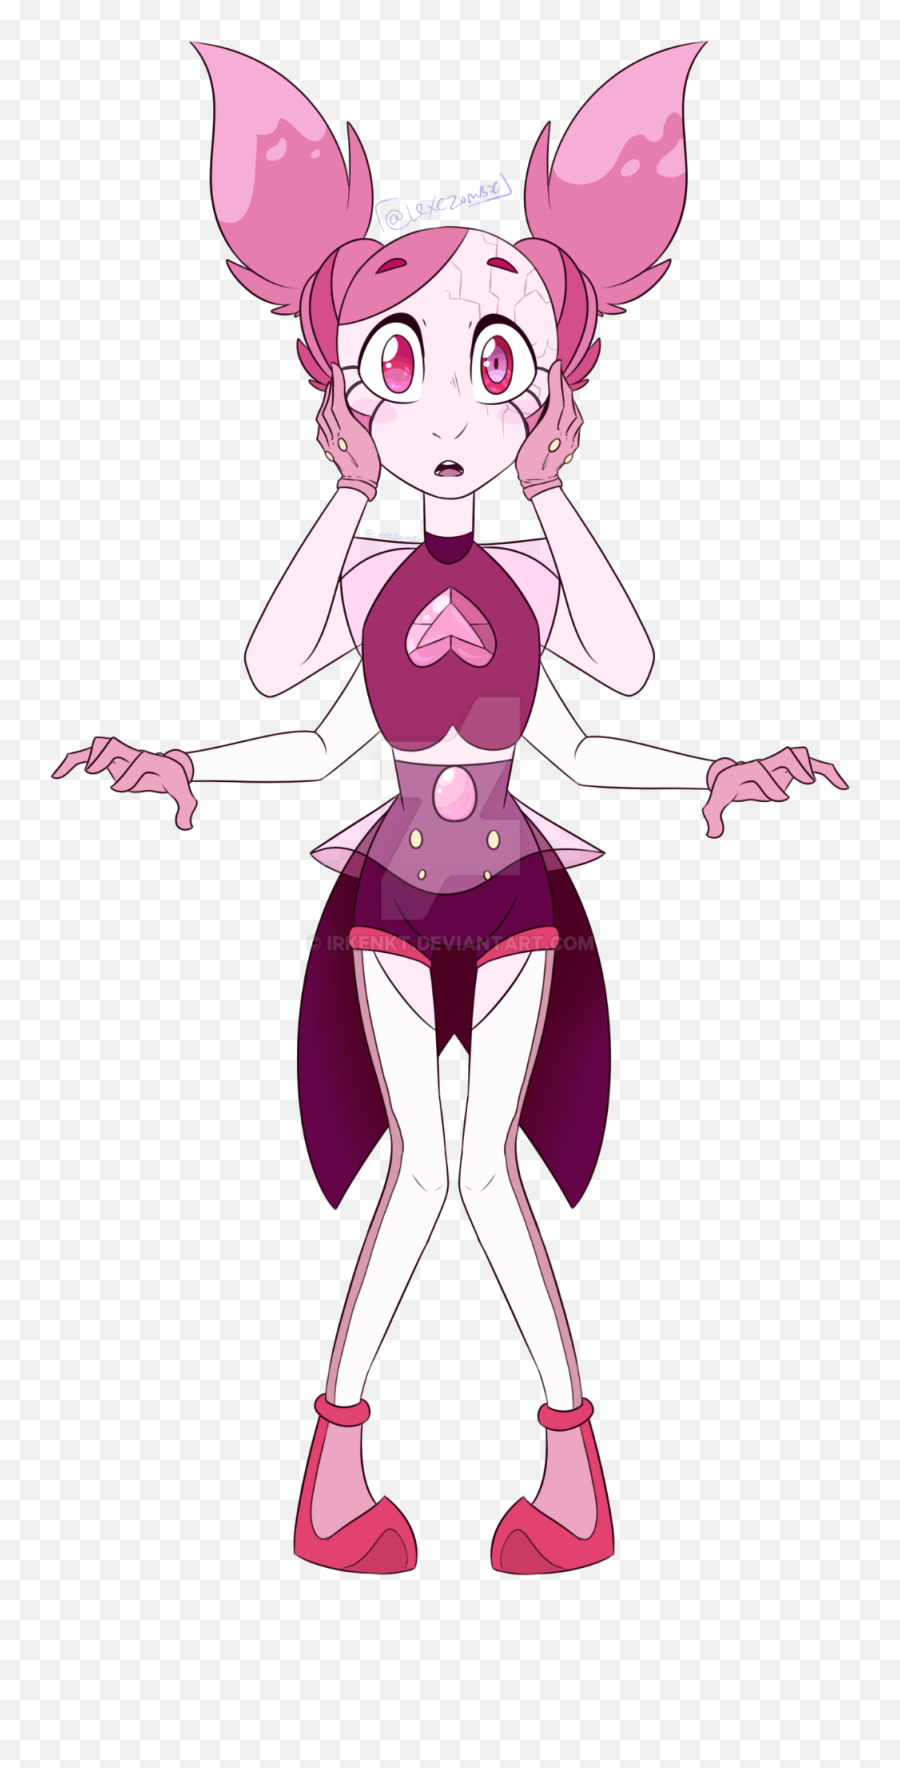 Download Free Universe Cartoon Spinel Photos Steven Icon - Steven Universe Spinel Fusion Png,Pearl Steven Universe Icon